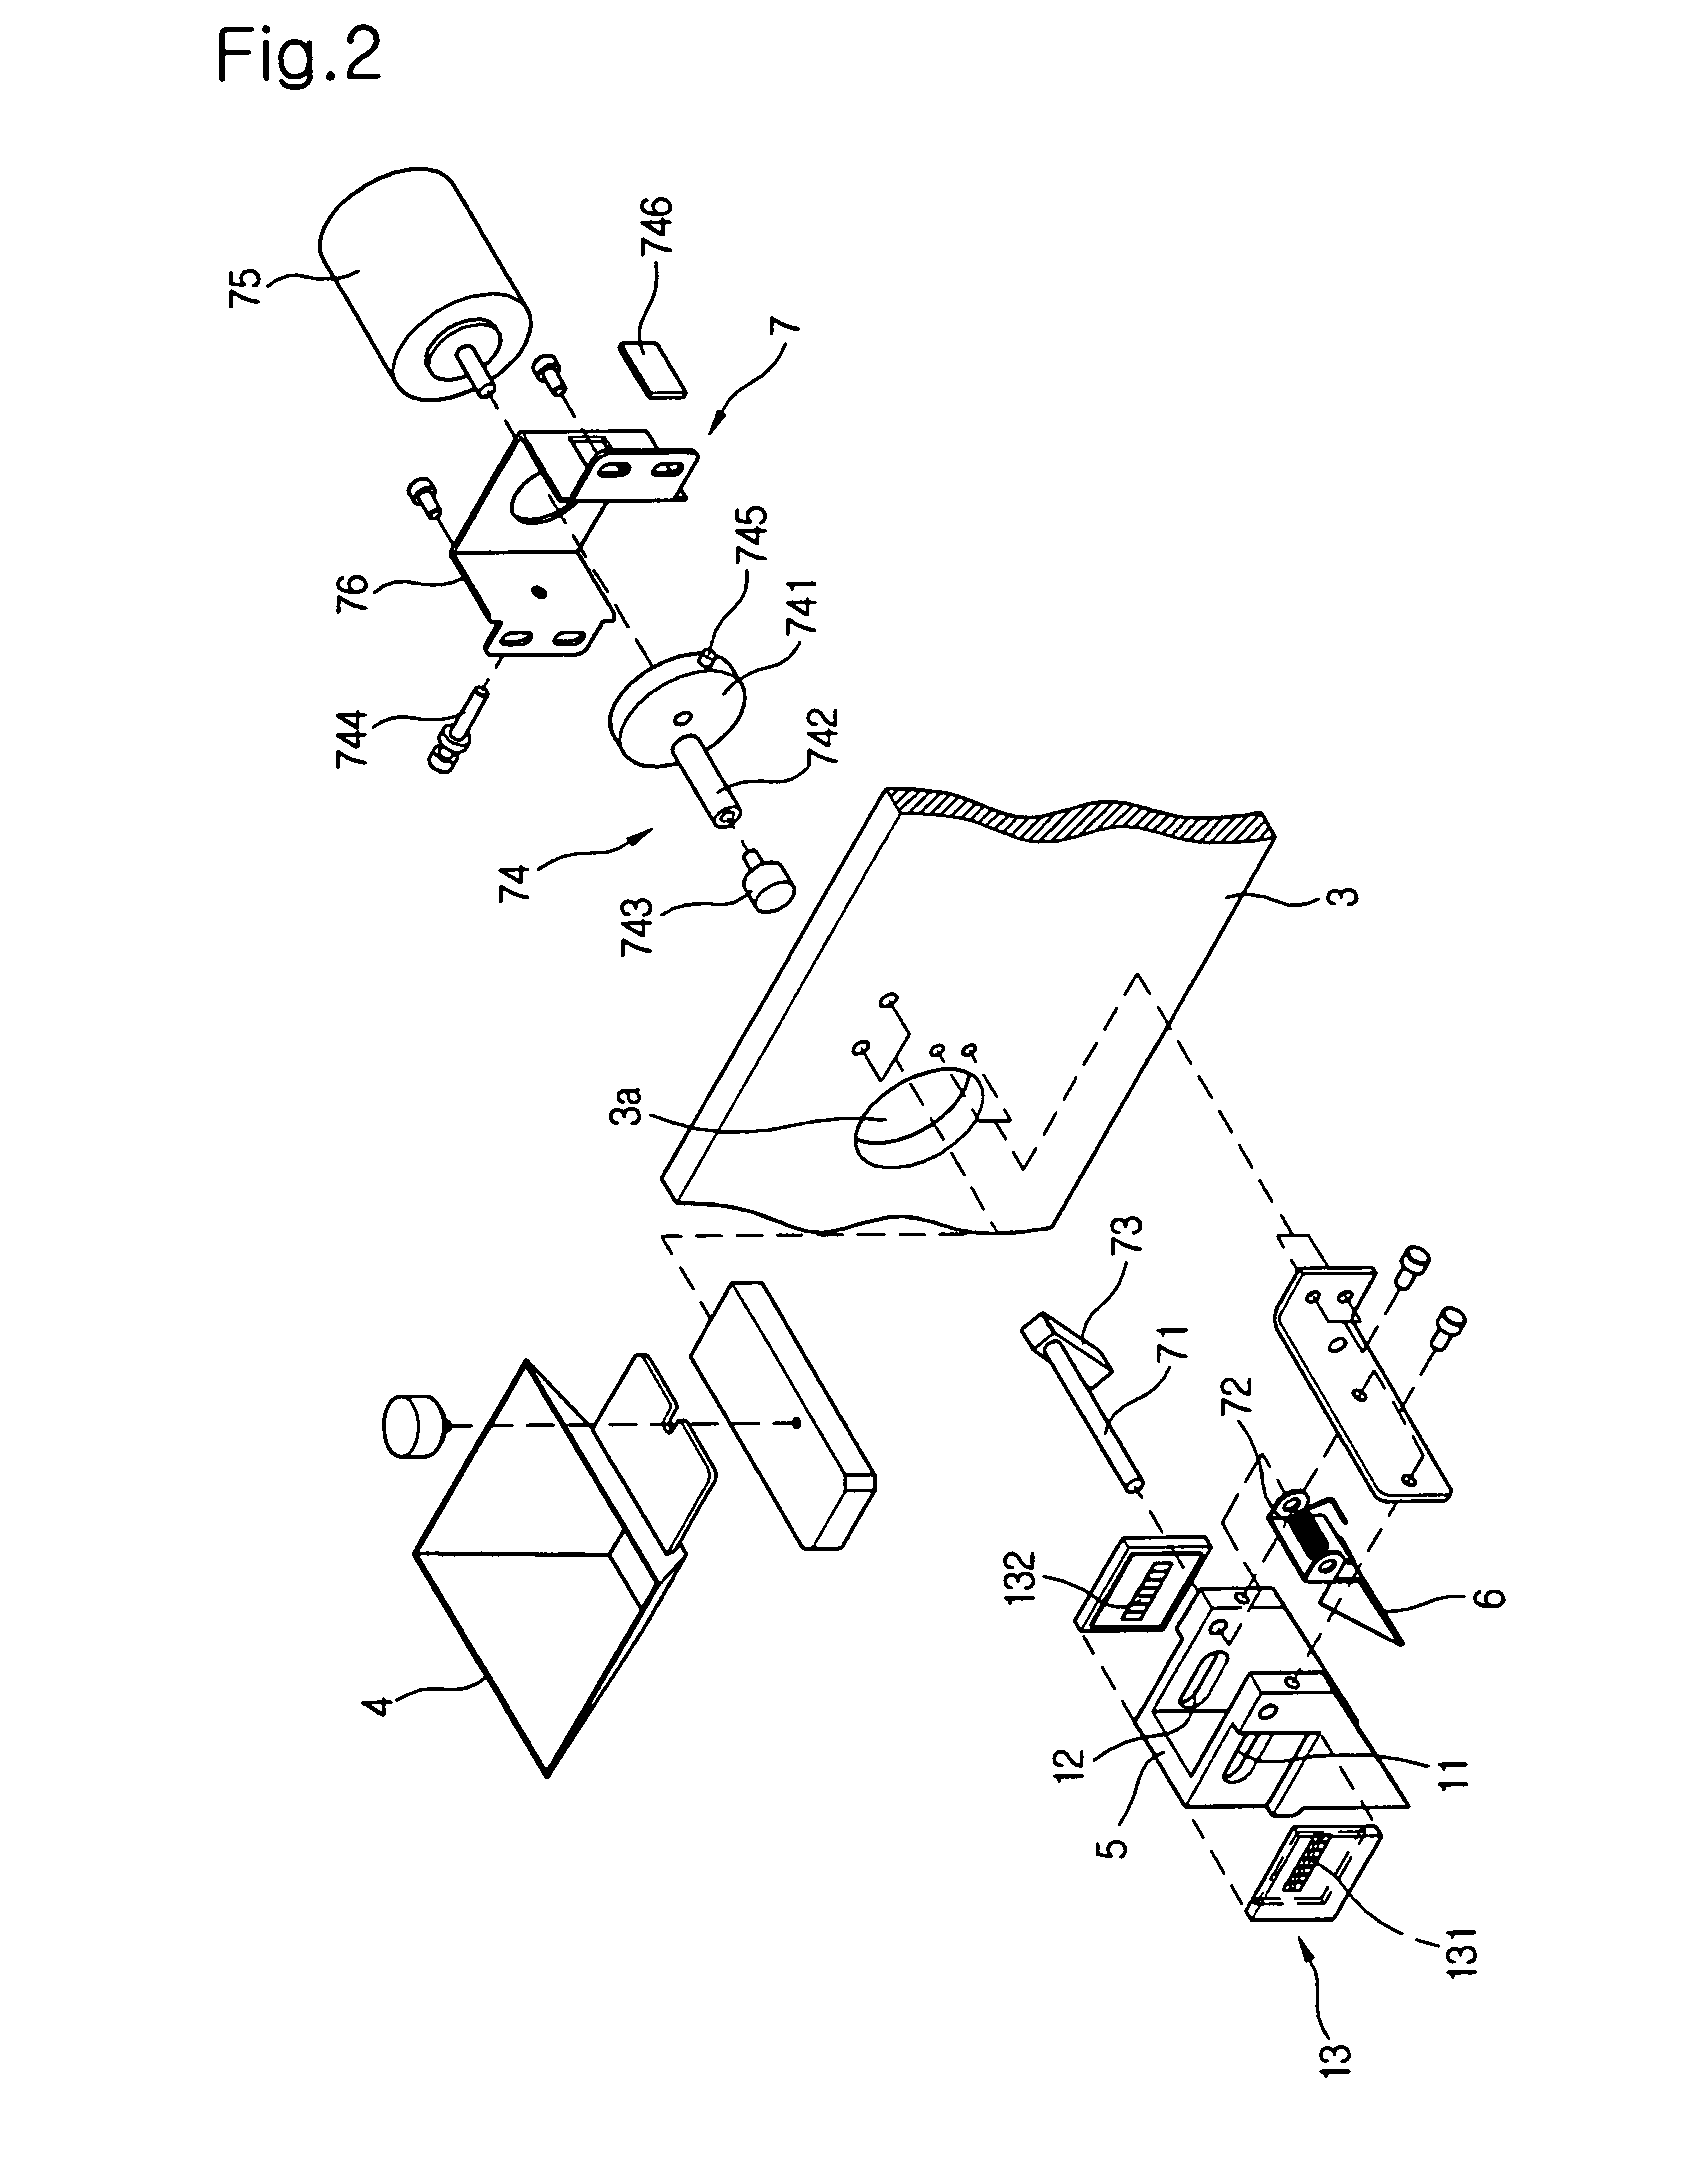 Apparatus for detecting of dropping tablets in automatic medicine packaging machine